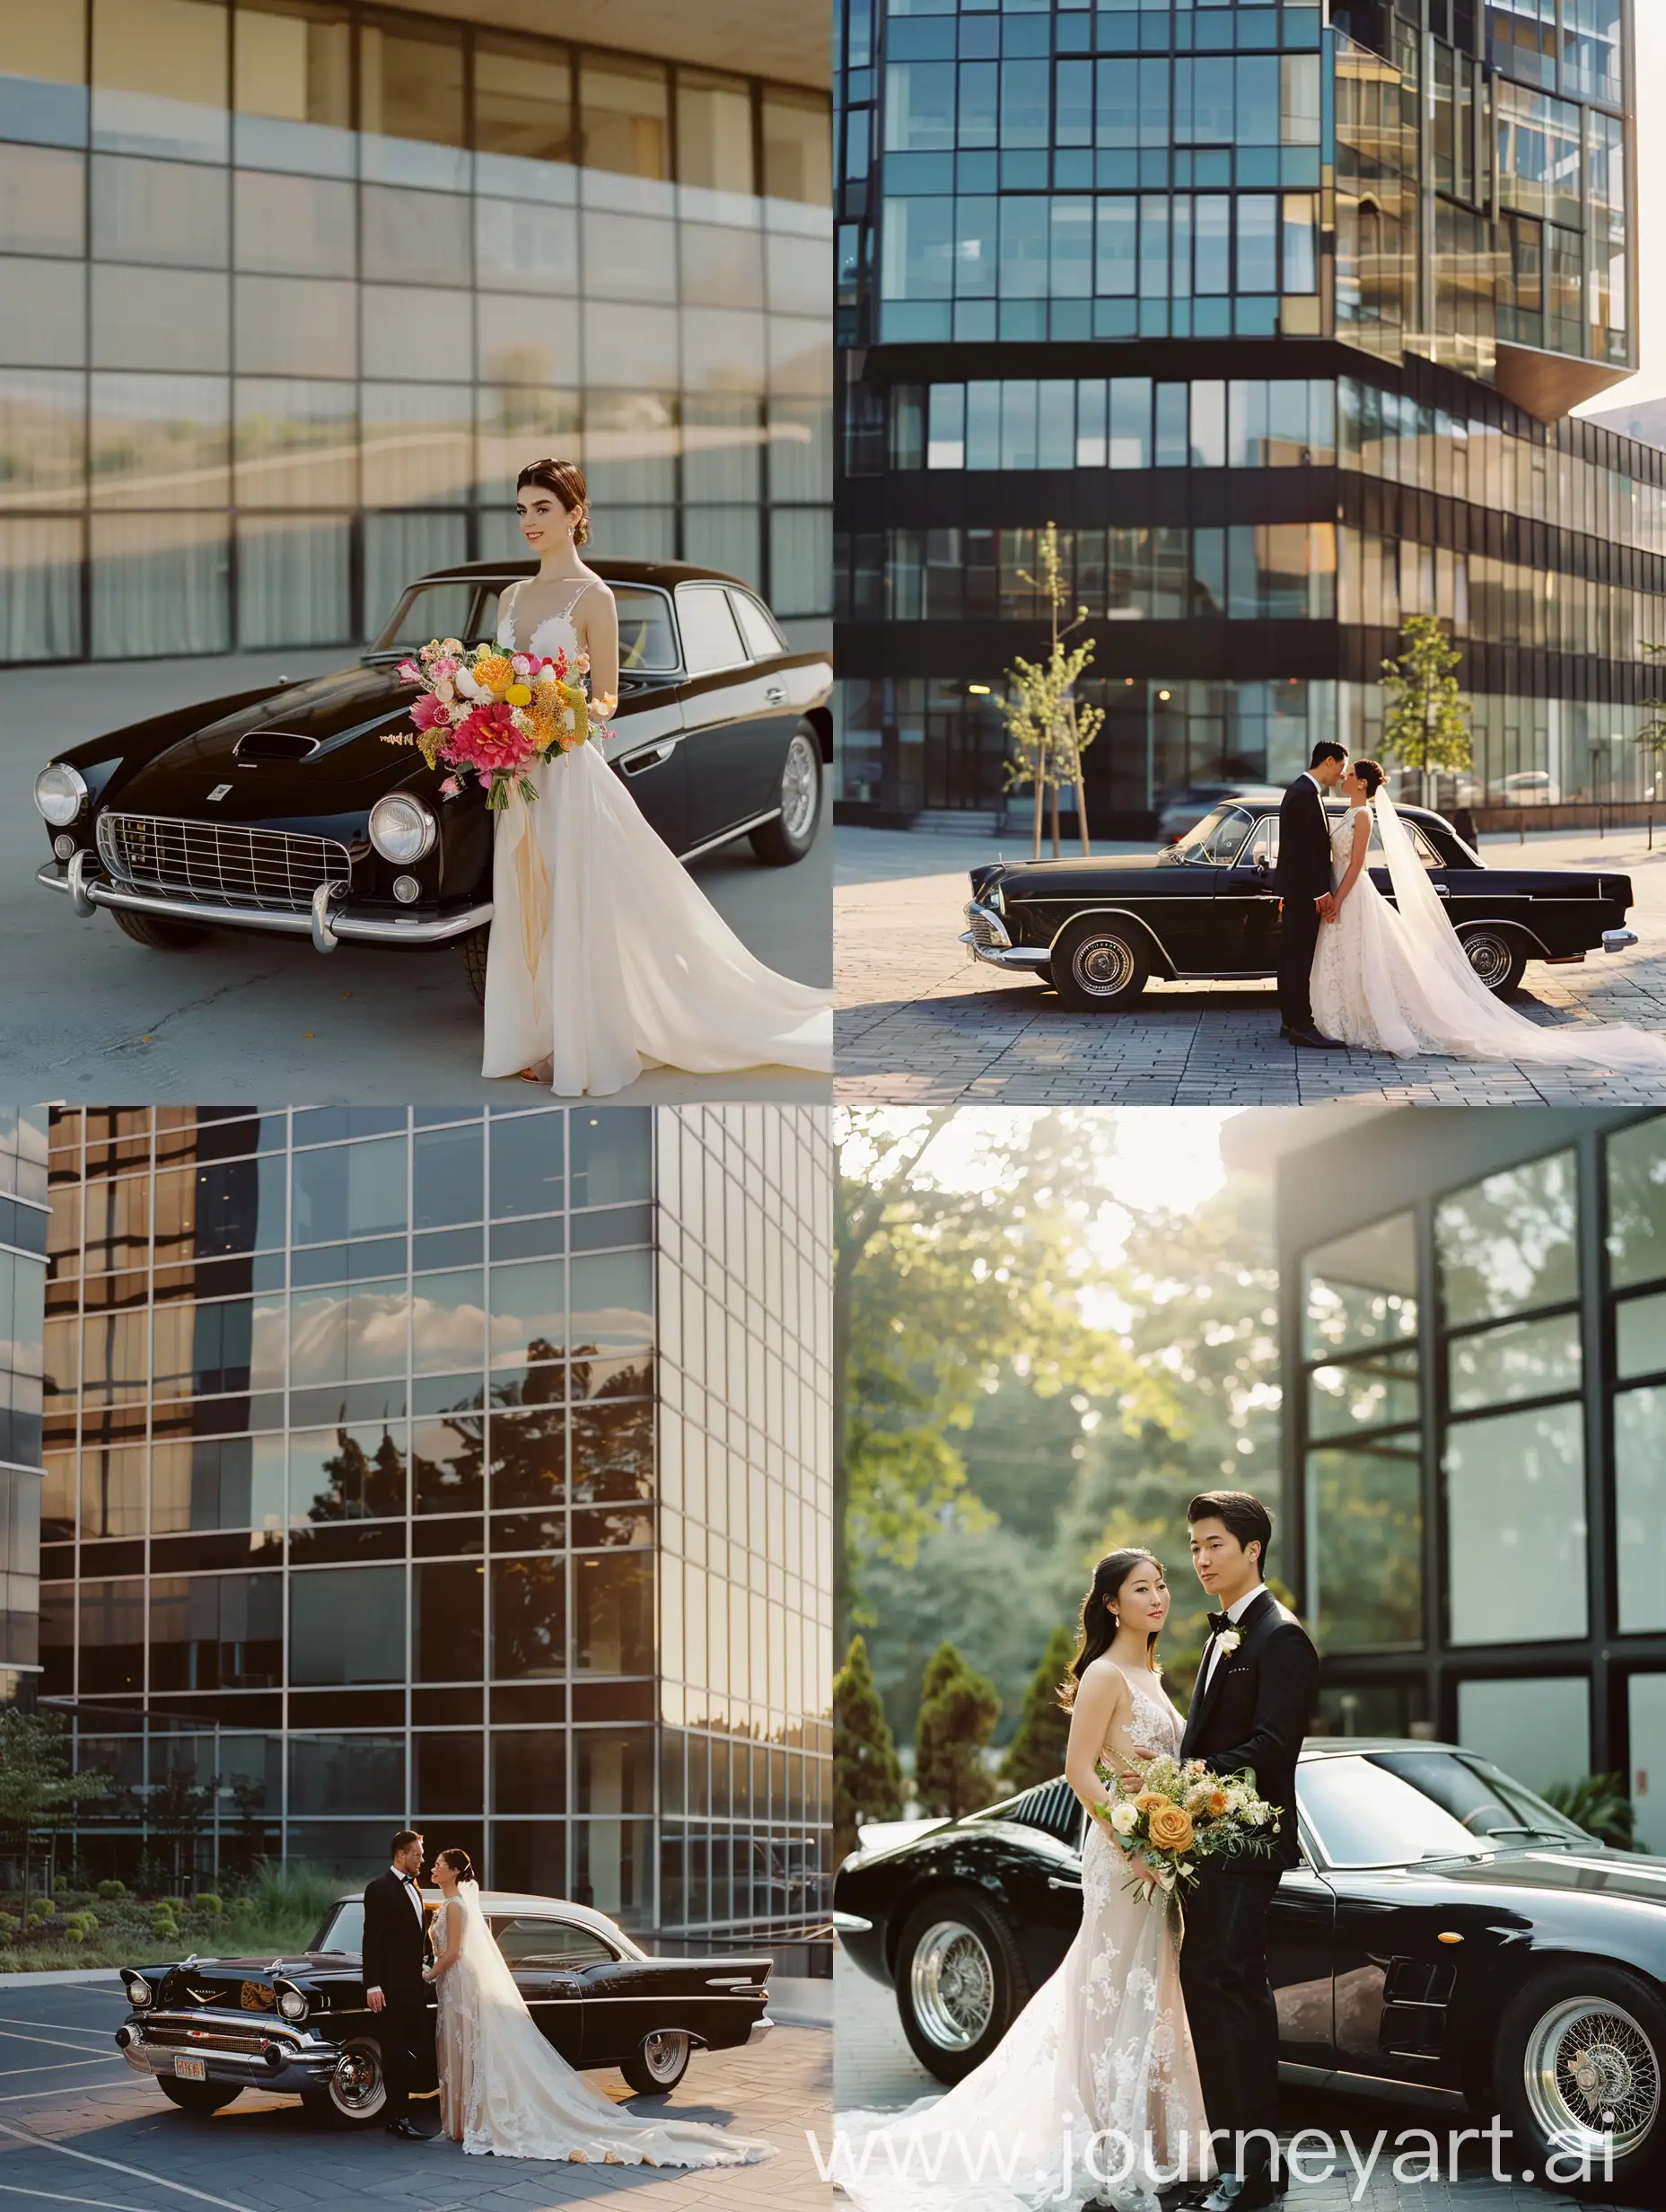 Editorial wedding photoshoot at modern bulding with classic car  using kodak portra 200 with 35mm film